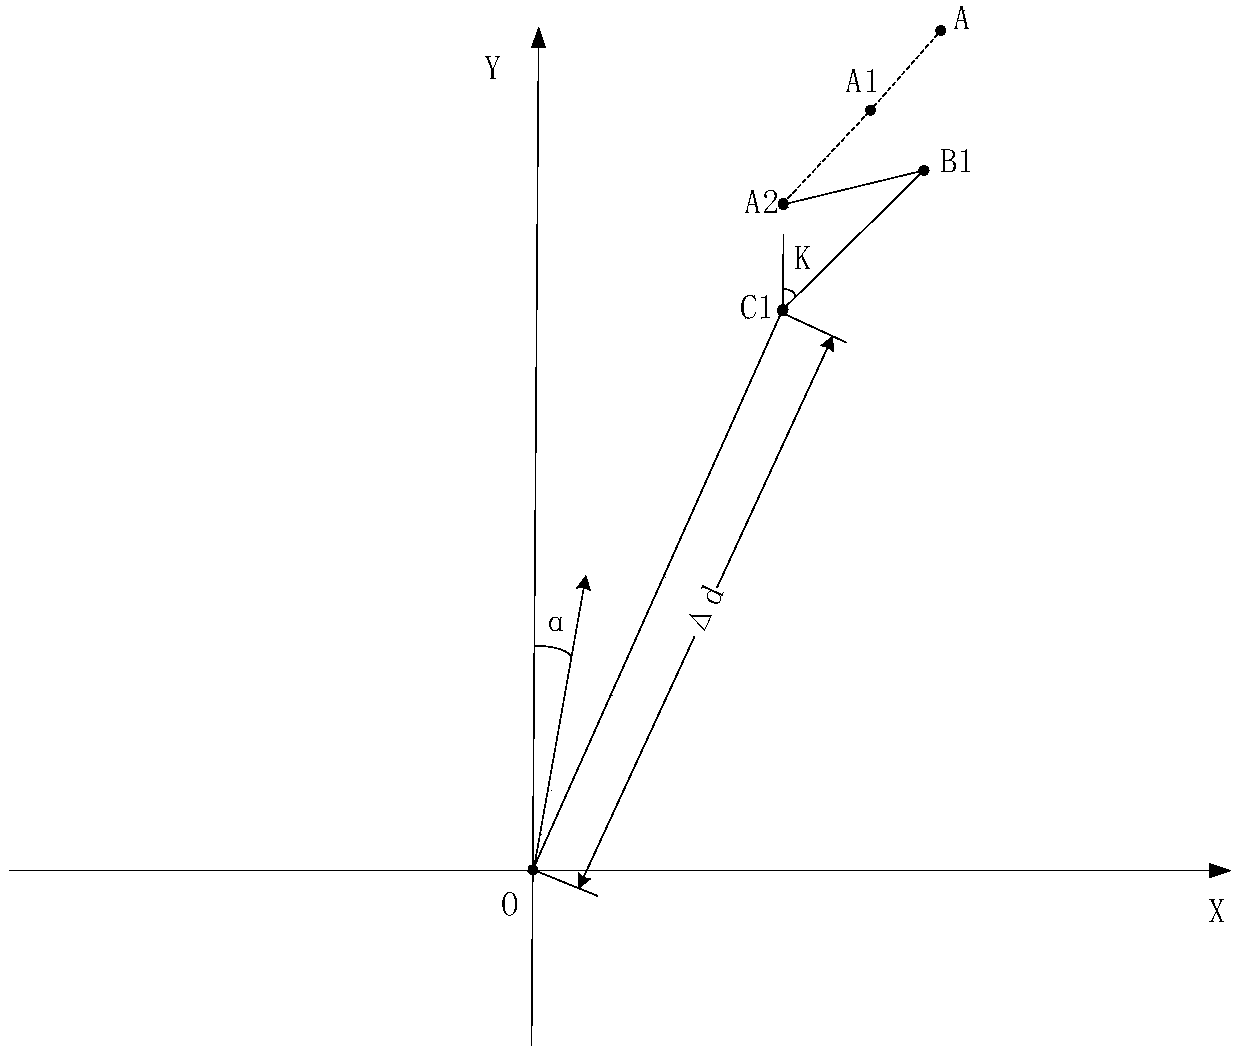 Guidance method for automatic delivery of materials by aircraft for moving targets